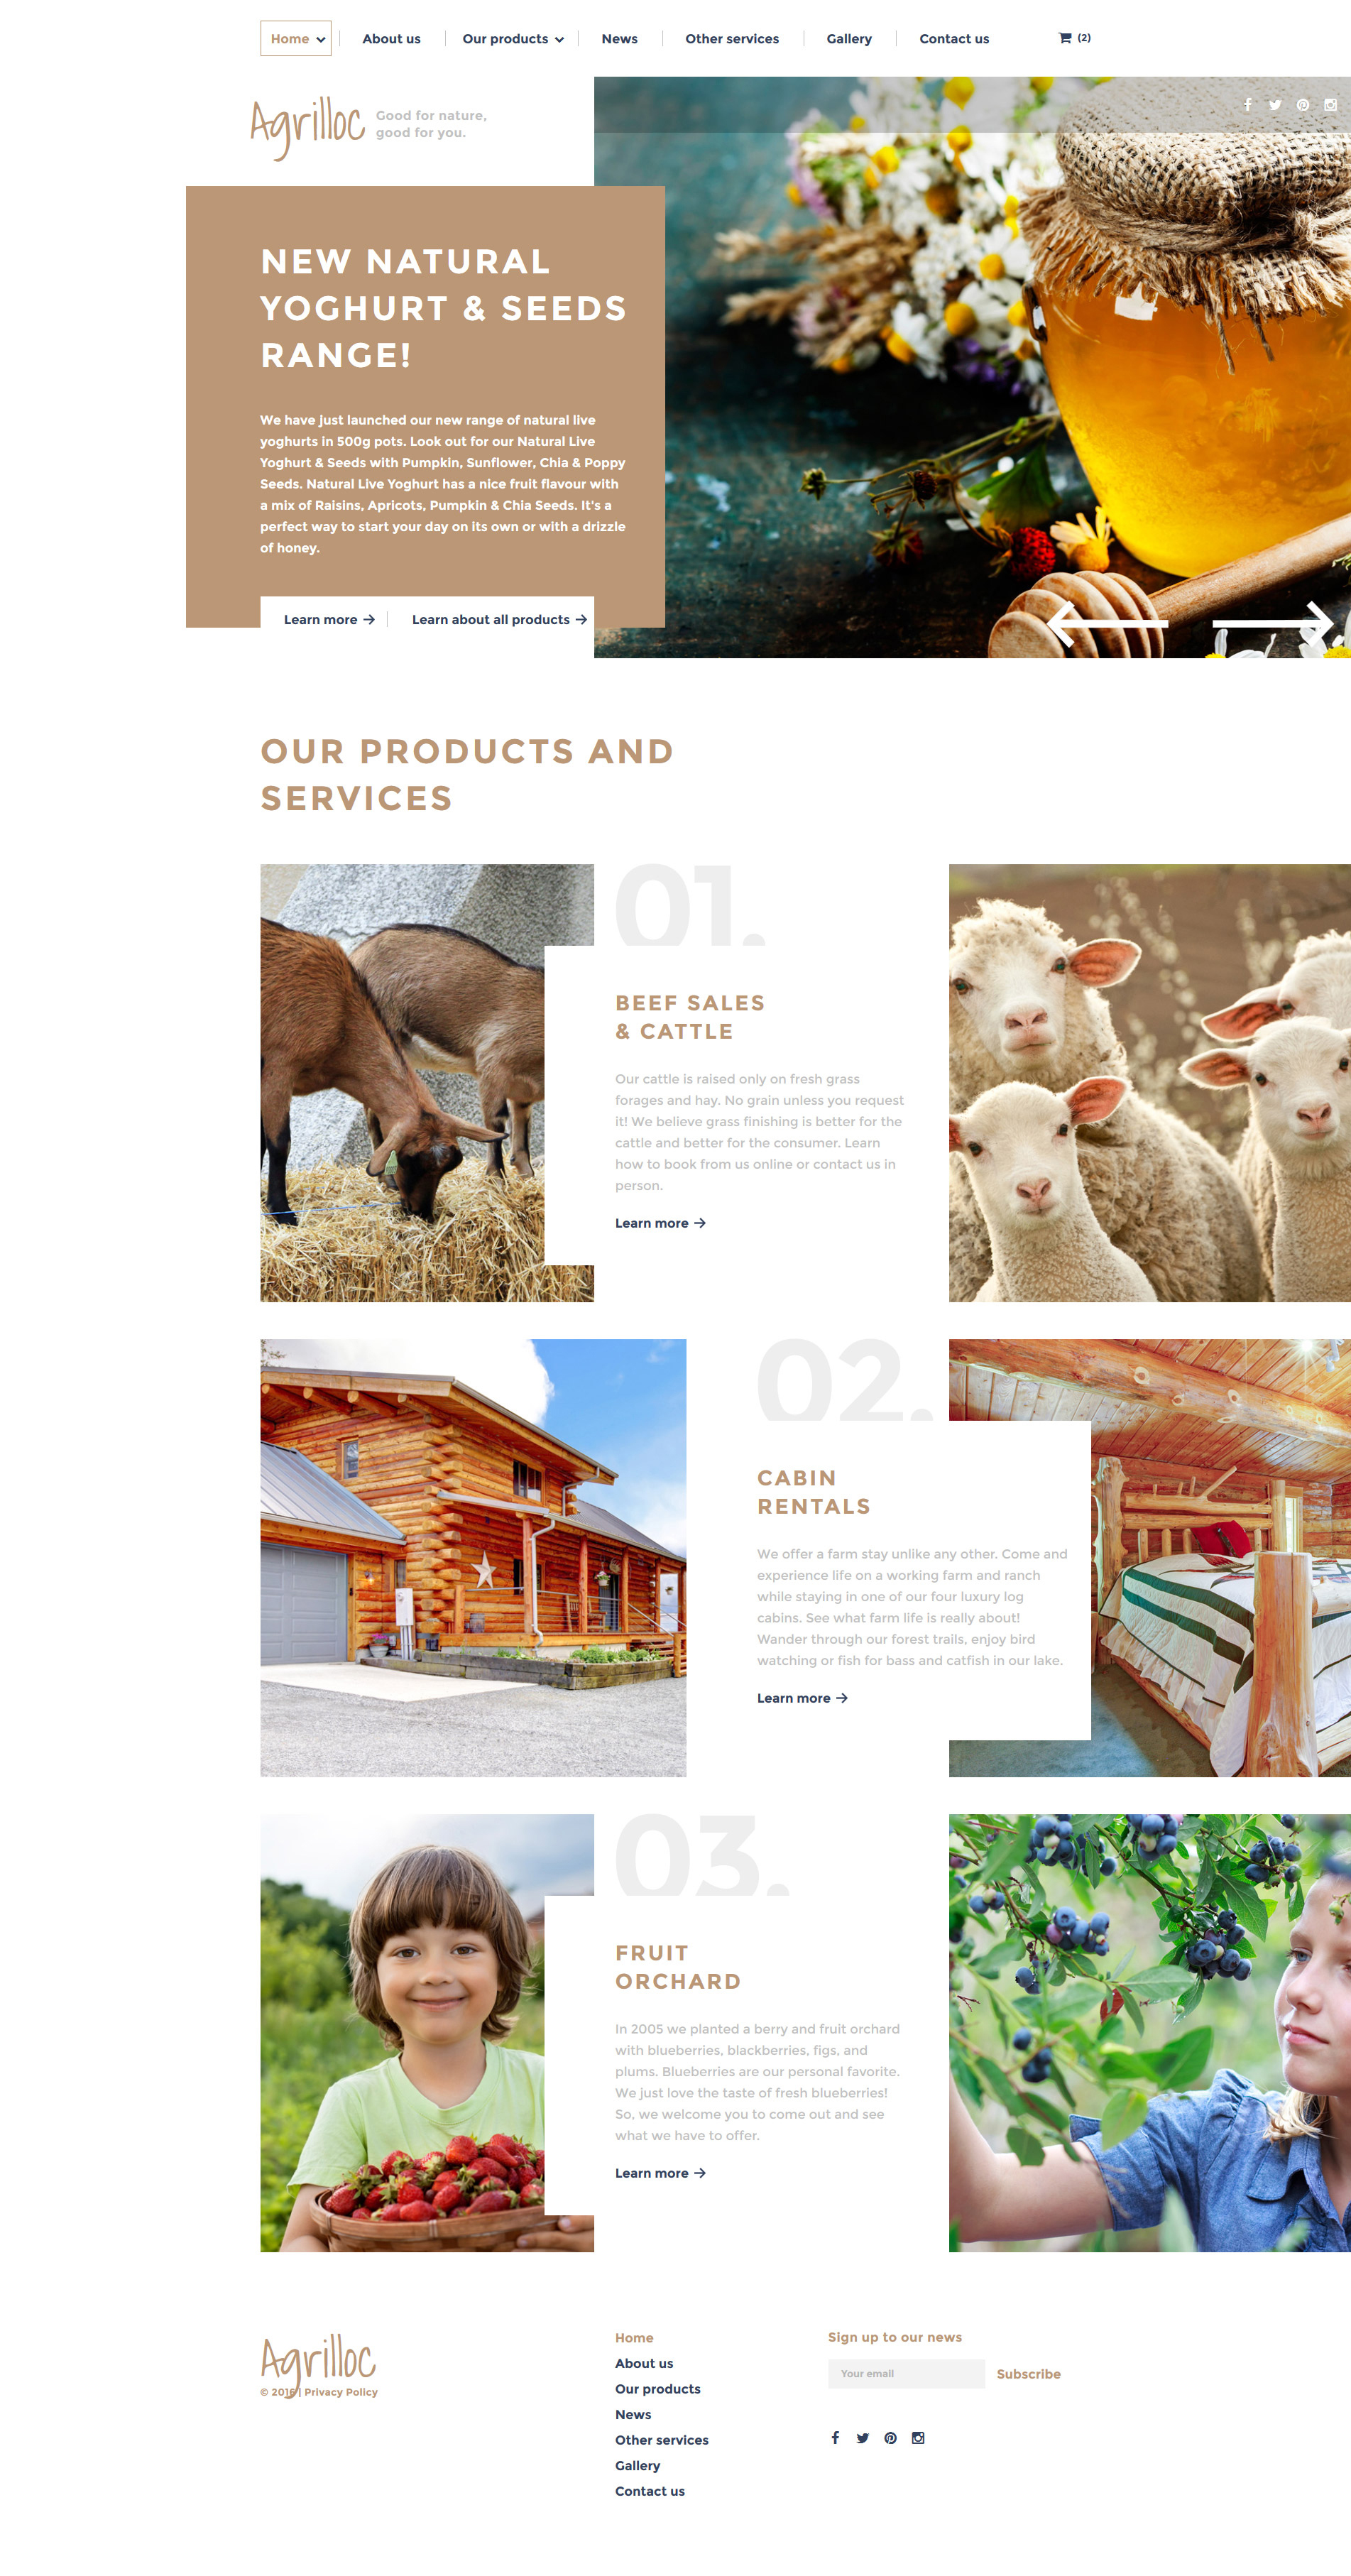 Agrilloc Website Template